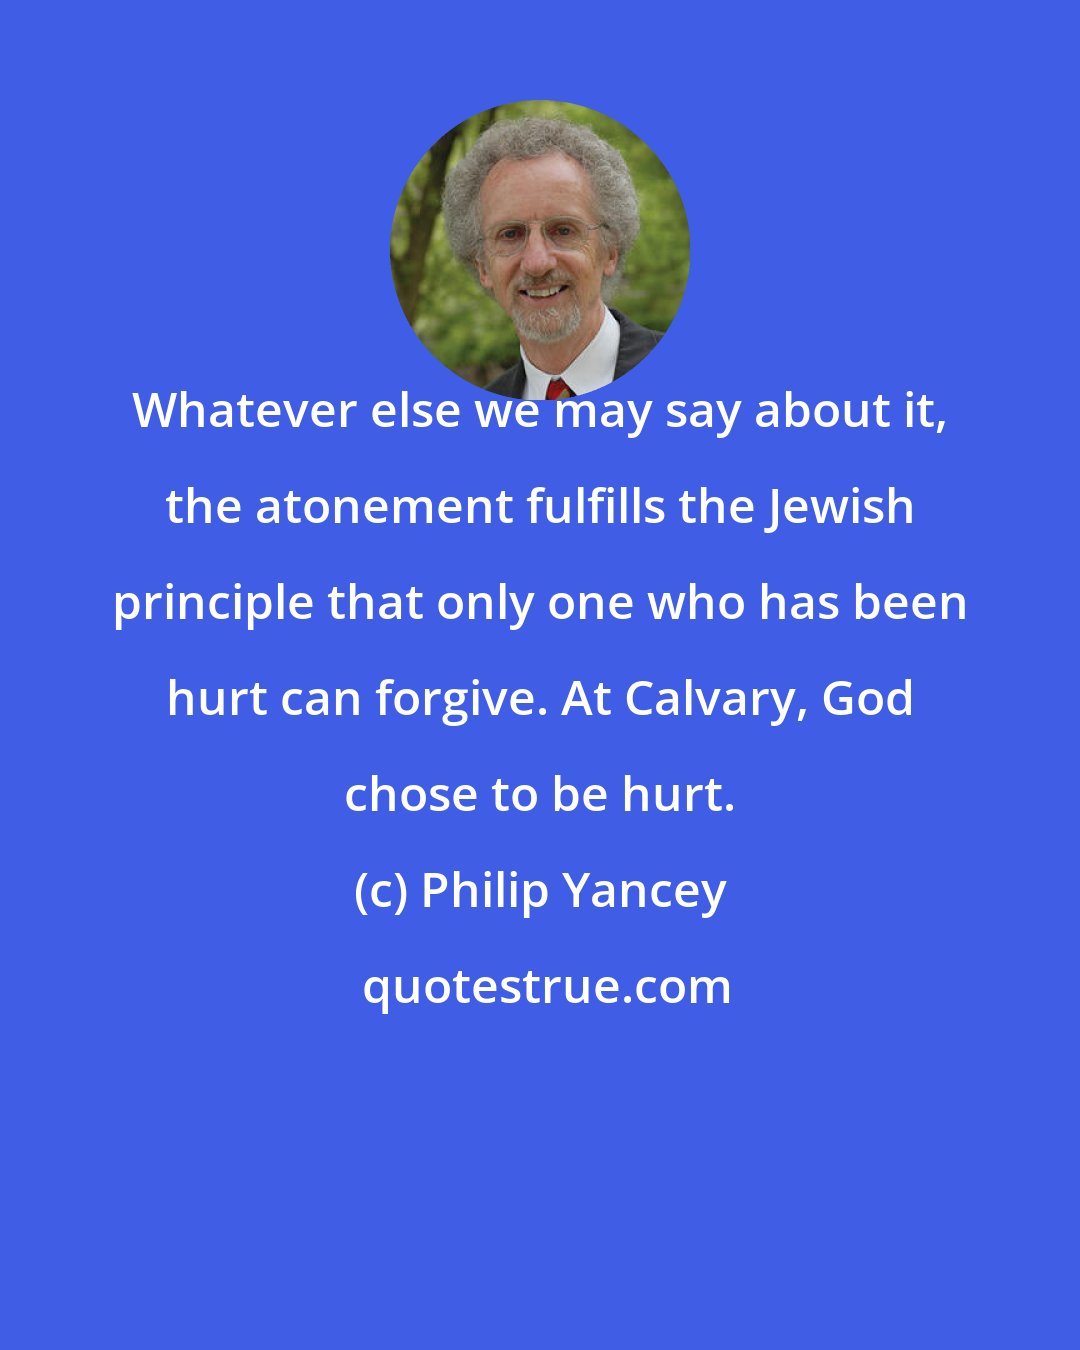 Philip Yancey: Whatever else we may say about it, the atonement fulfills the Jewish principle that only one who has been hurt can forgive. At Calvary, God chose to be hurt.